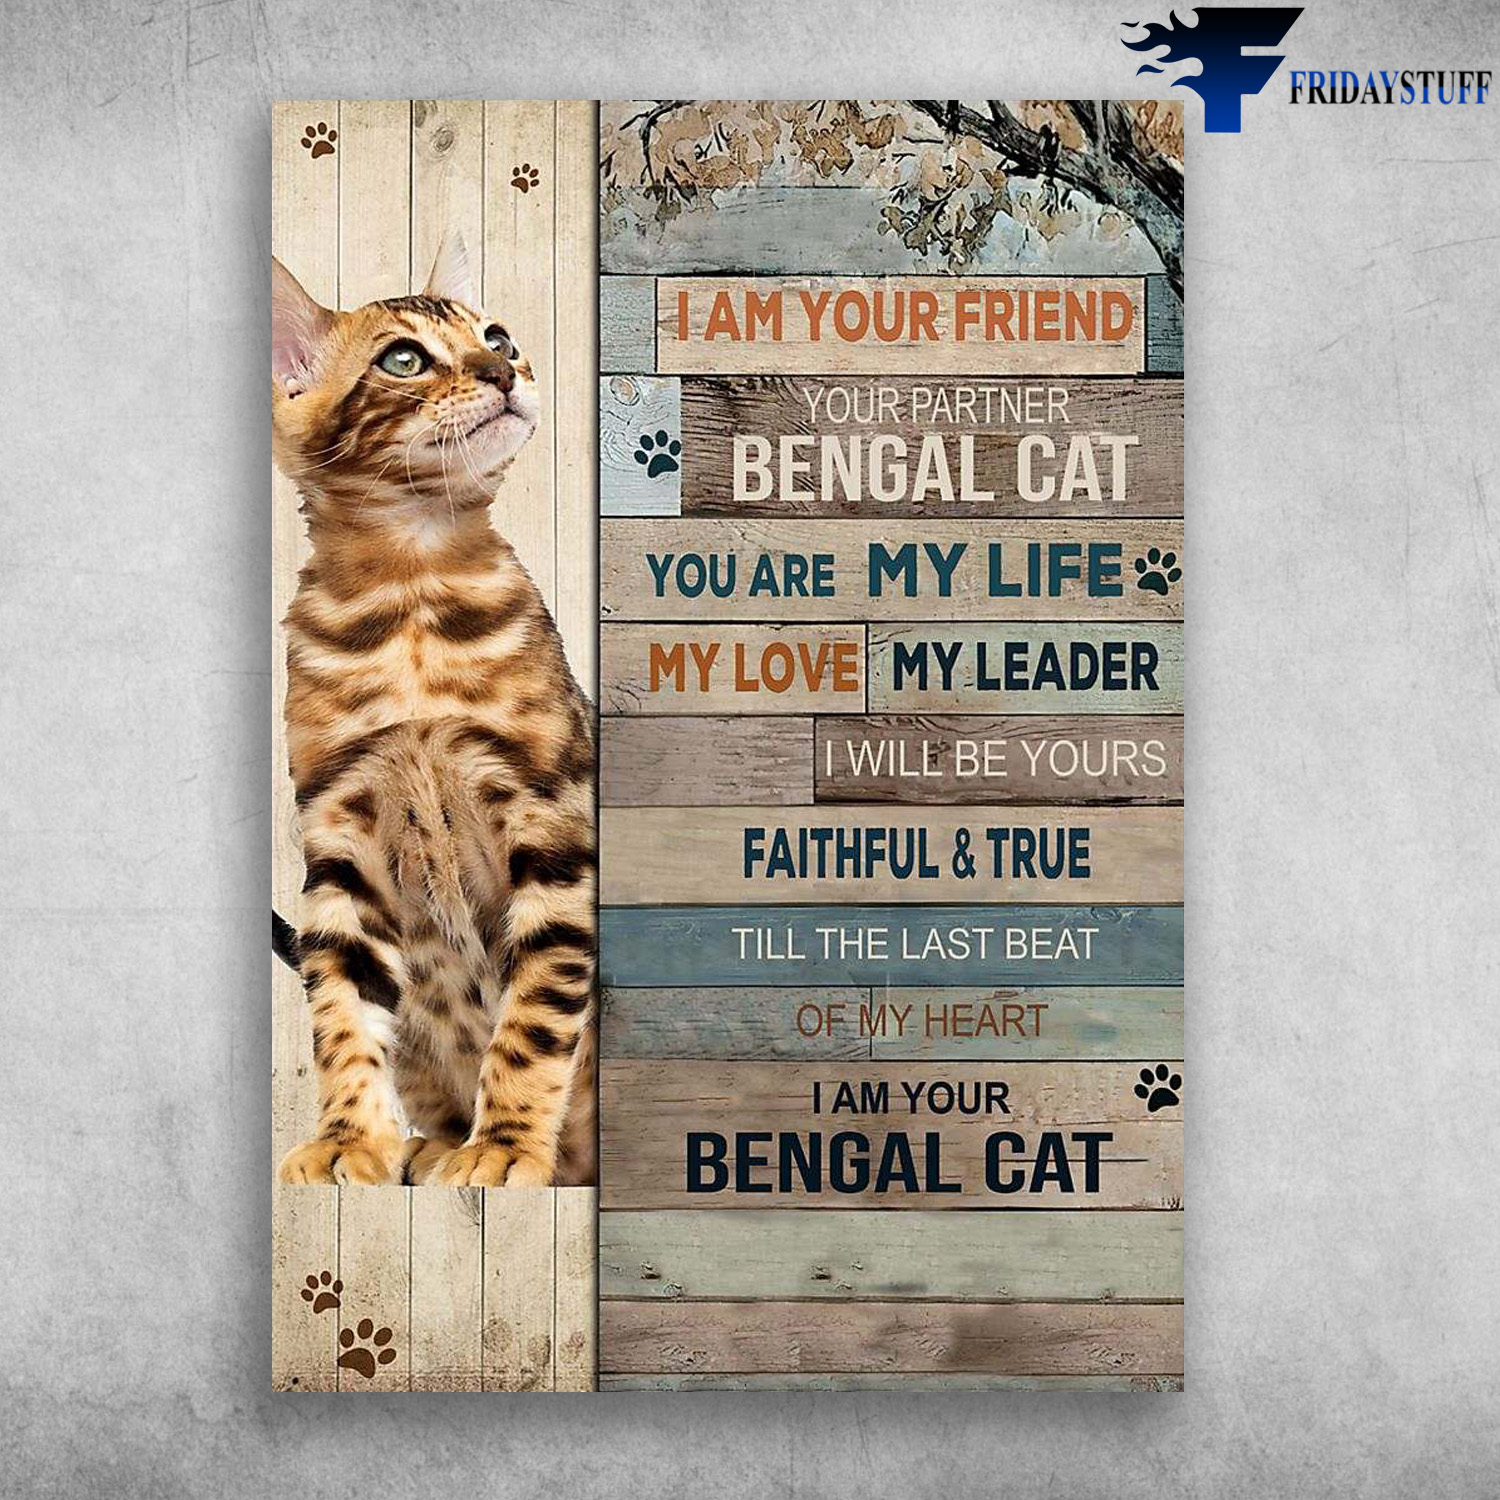 Bengal Cat - I Am Your Friend, Your Partner, Your Bengal Cat, You Are My Life, My Love, My Leader, I Will Be Yours, Faithful And True, Till The Last Beat Of My Heart, I Am Your Bengal Cat